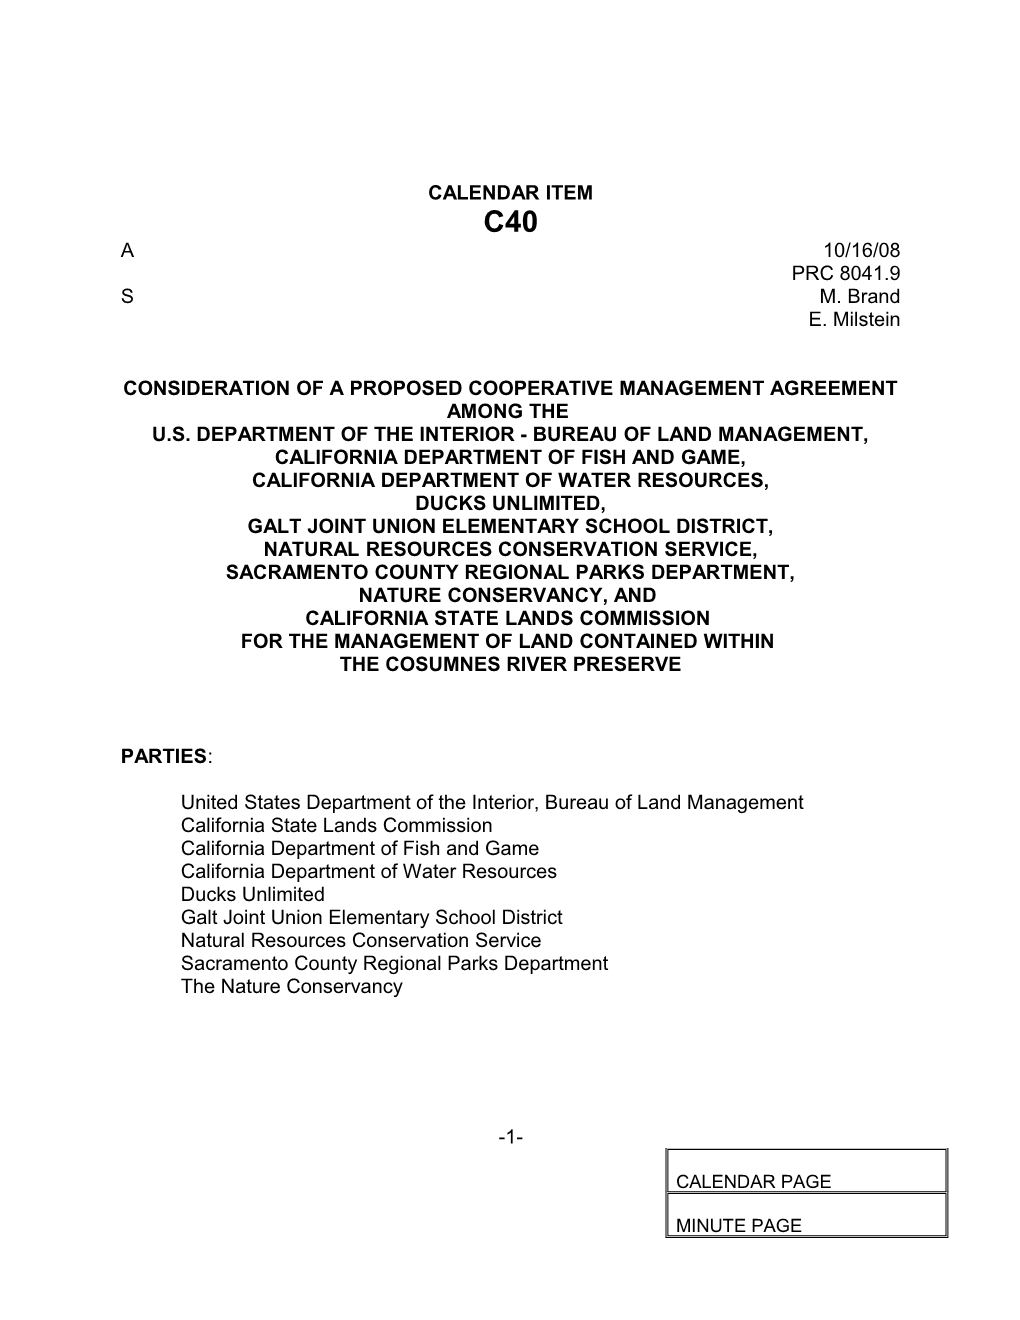 Consideration of a Proposed Cooperative Management Agreement Among The